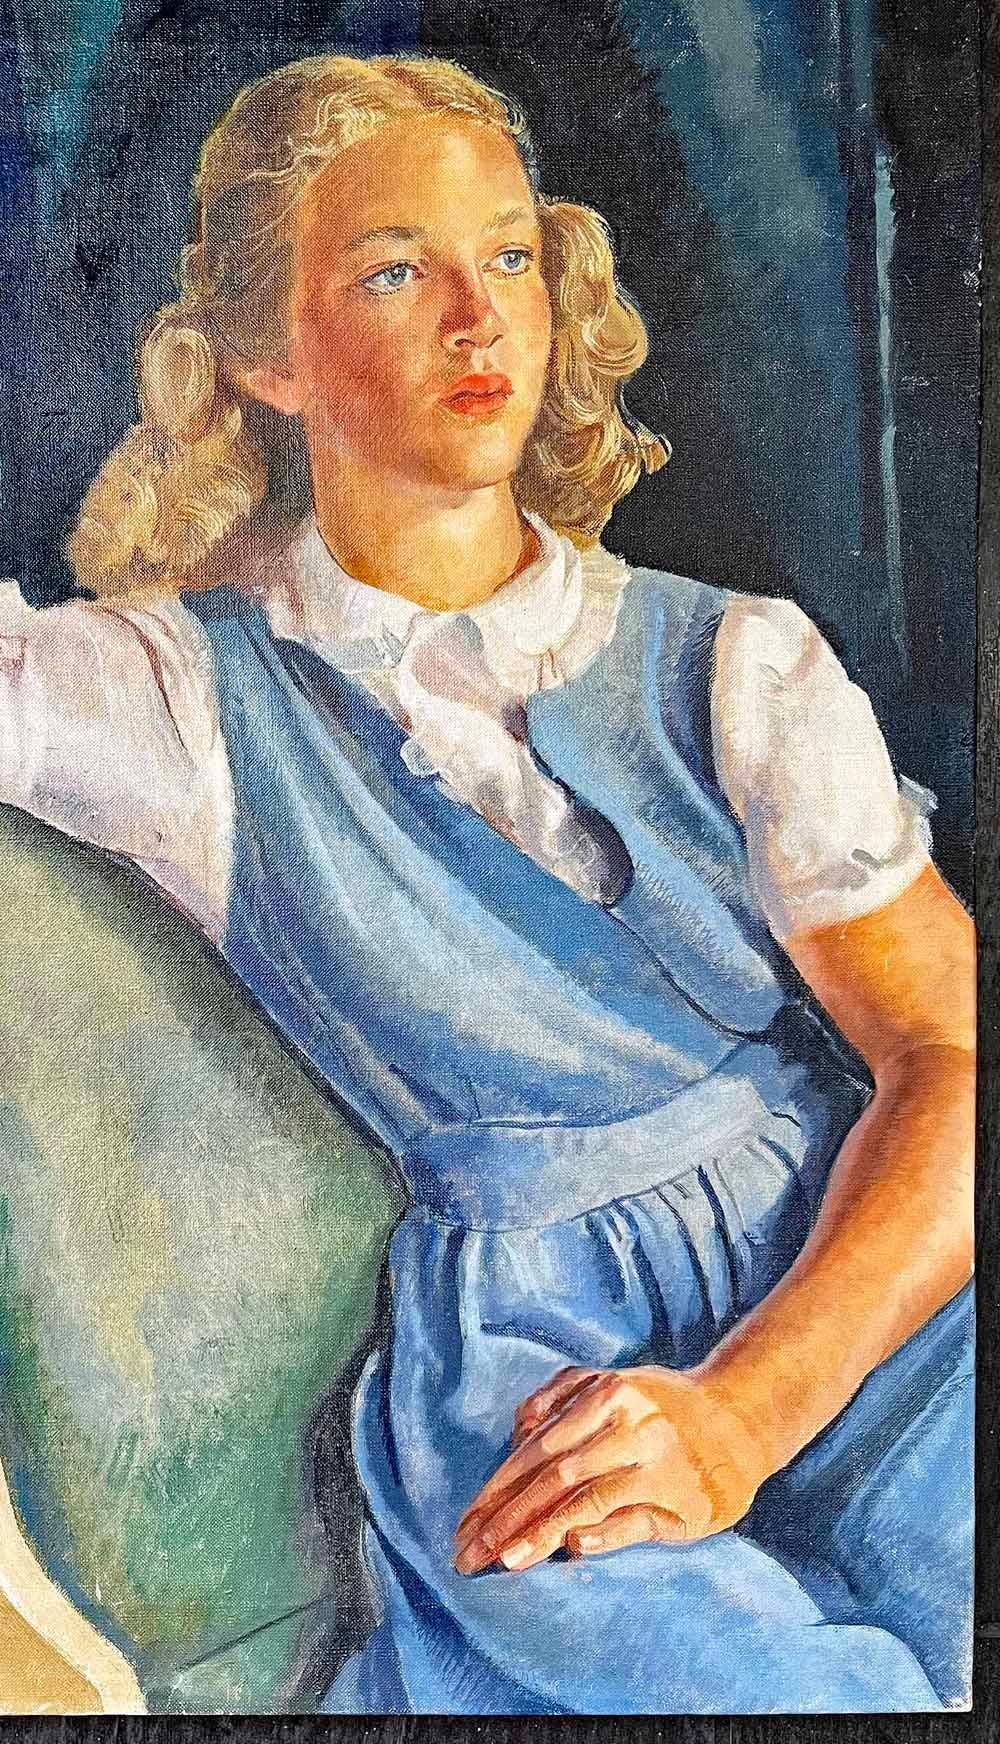 This fresh and vibrant portrait of a young woman with glowing blond hair and a blue 1940s frock is one of the finest World War II vintage portraits we have ever offered.  Her complexion is rosy and lovely, her arms and hands are beautifully